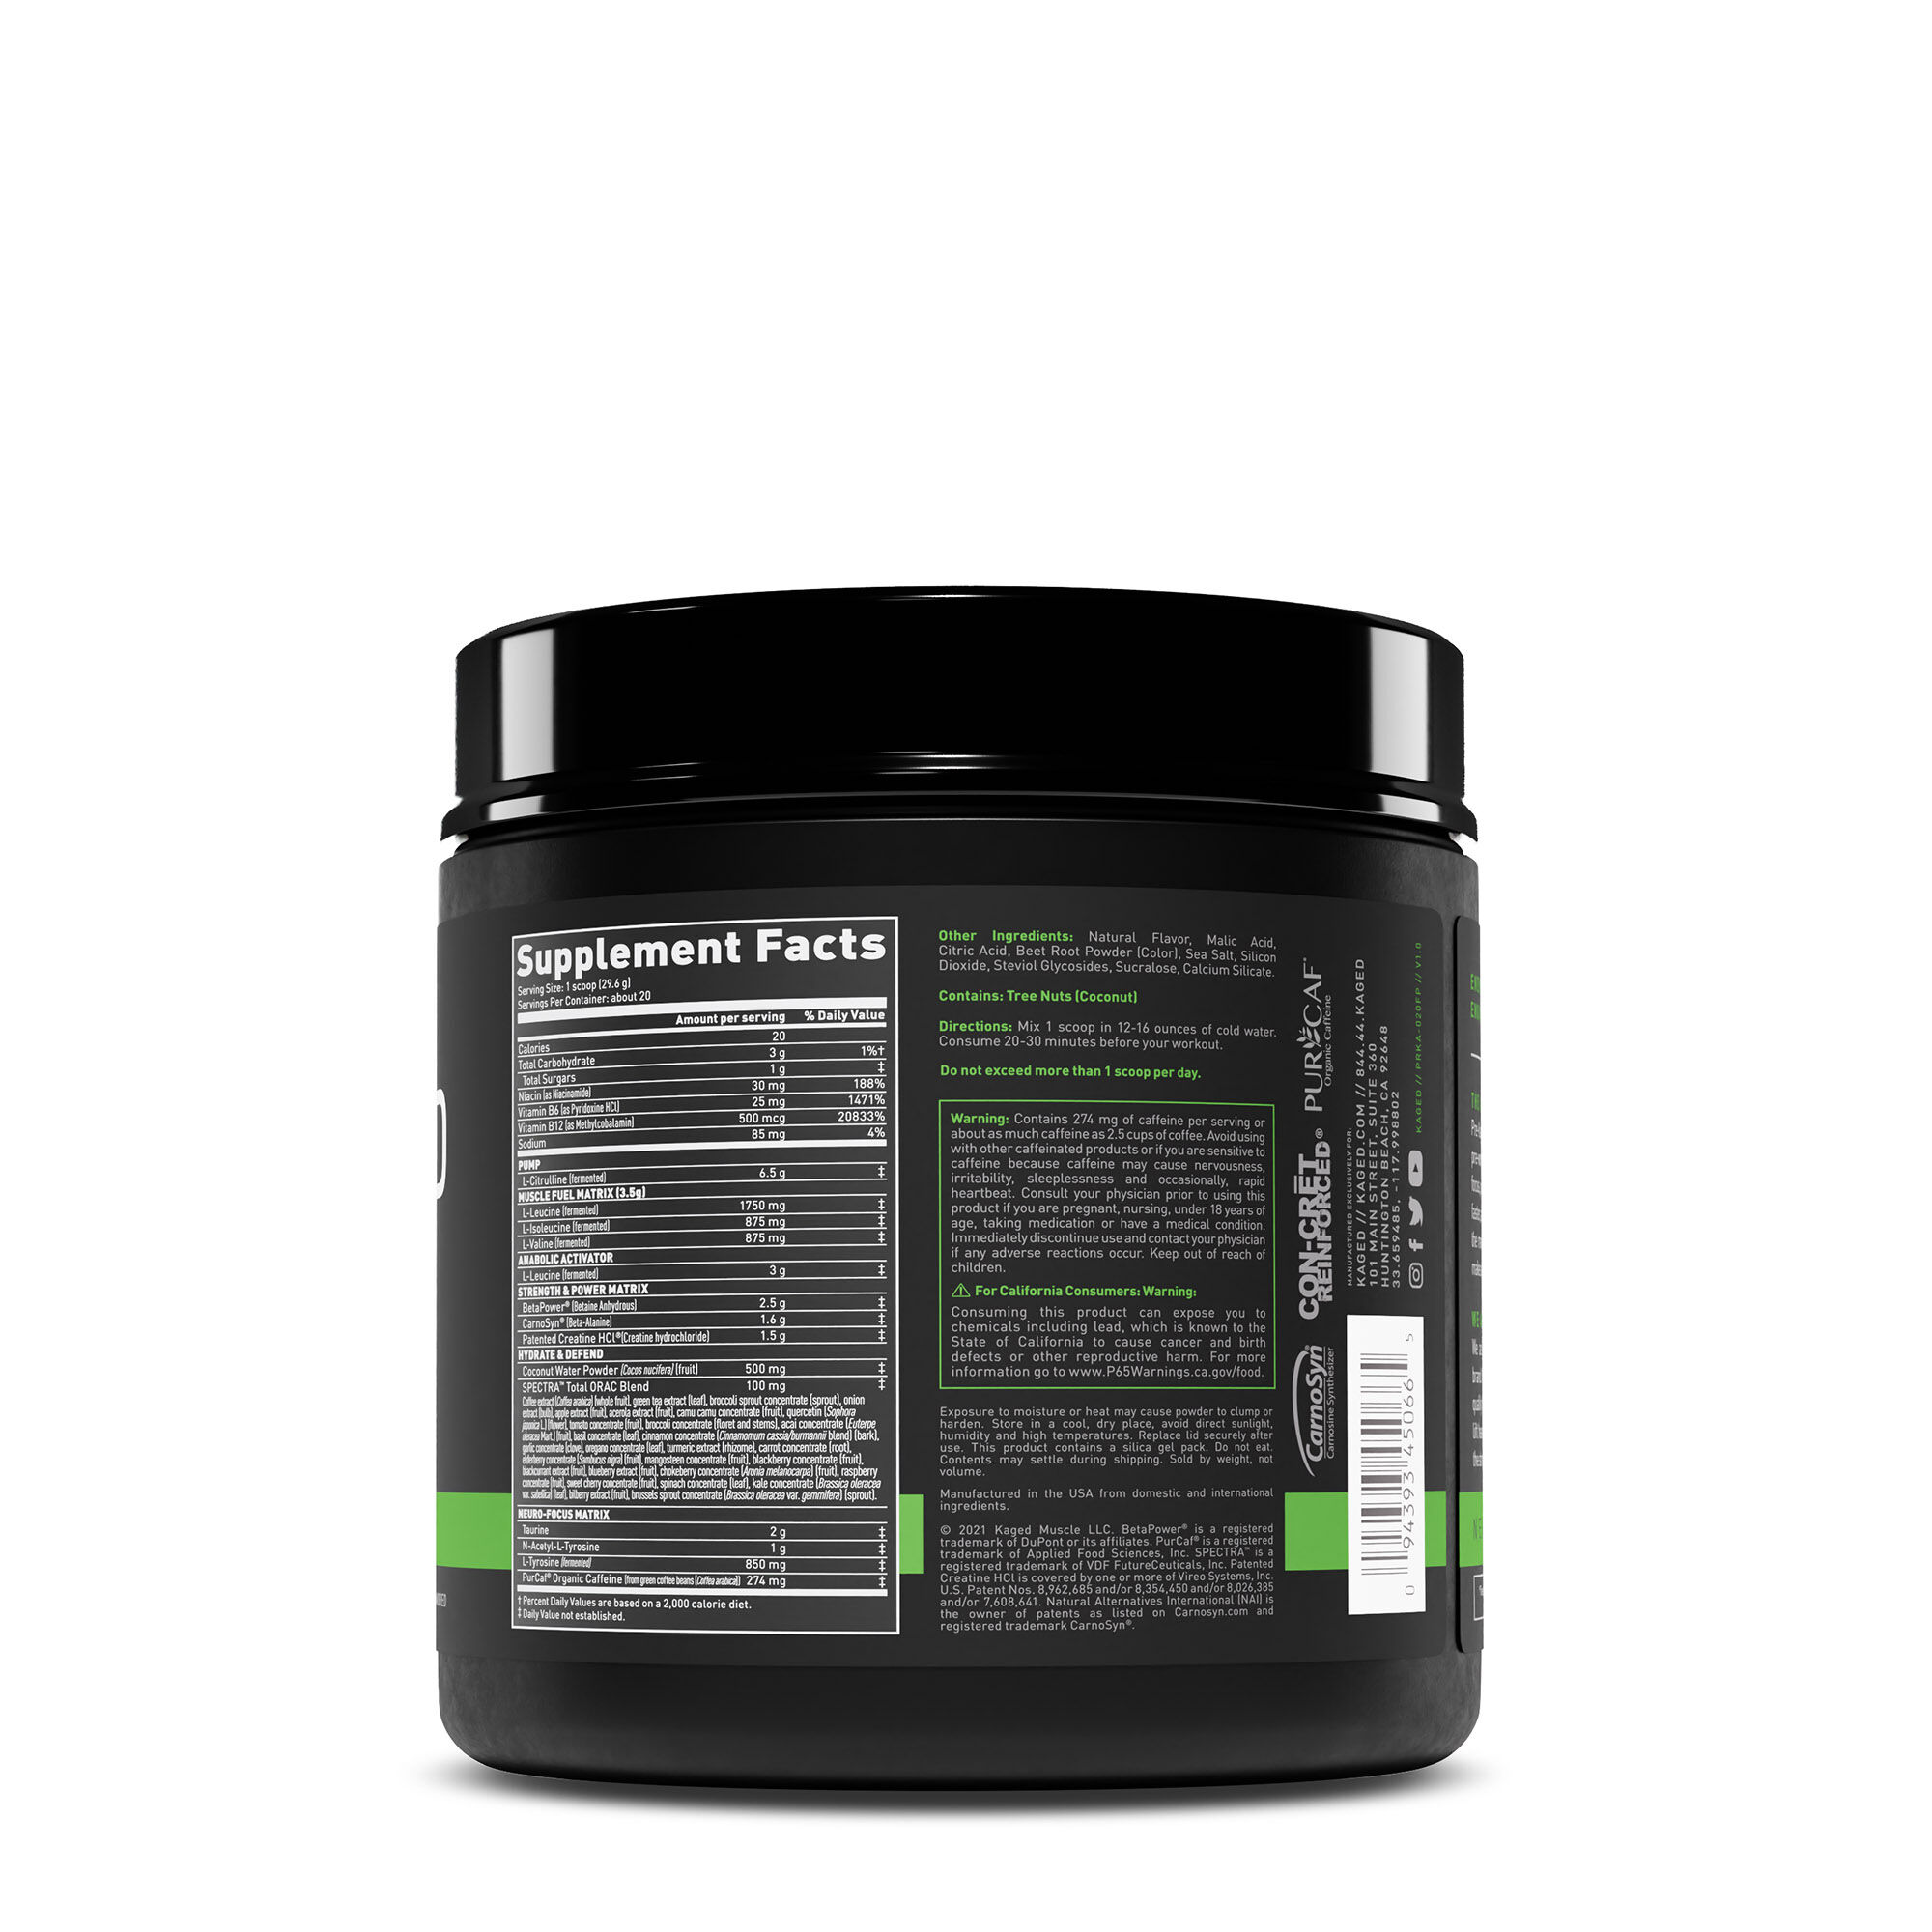 Kaged Muscle Pre Kaged 621g Ultra Explosive Primer Pre Workout 20serv 3 Flavours 